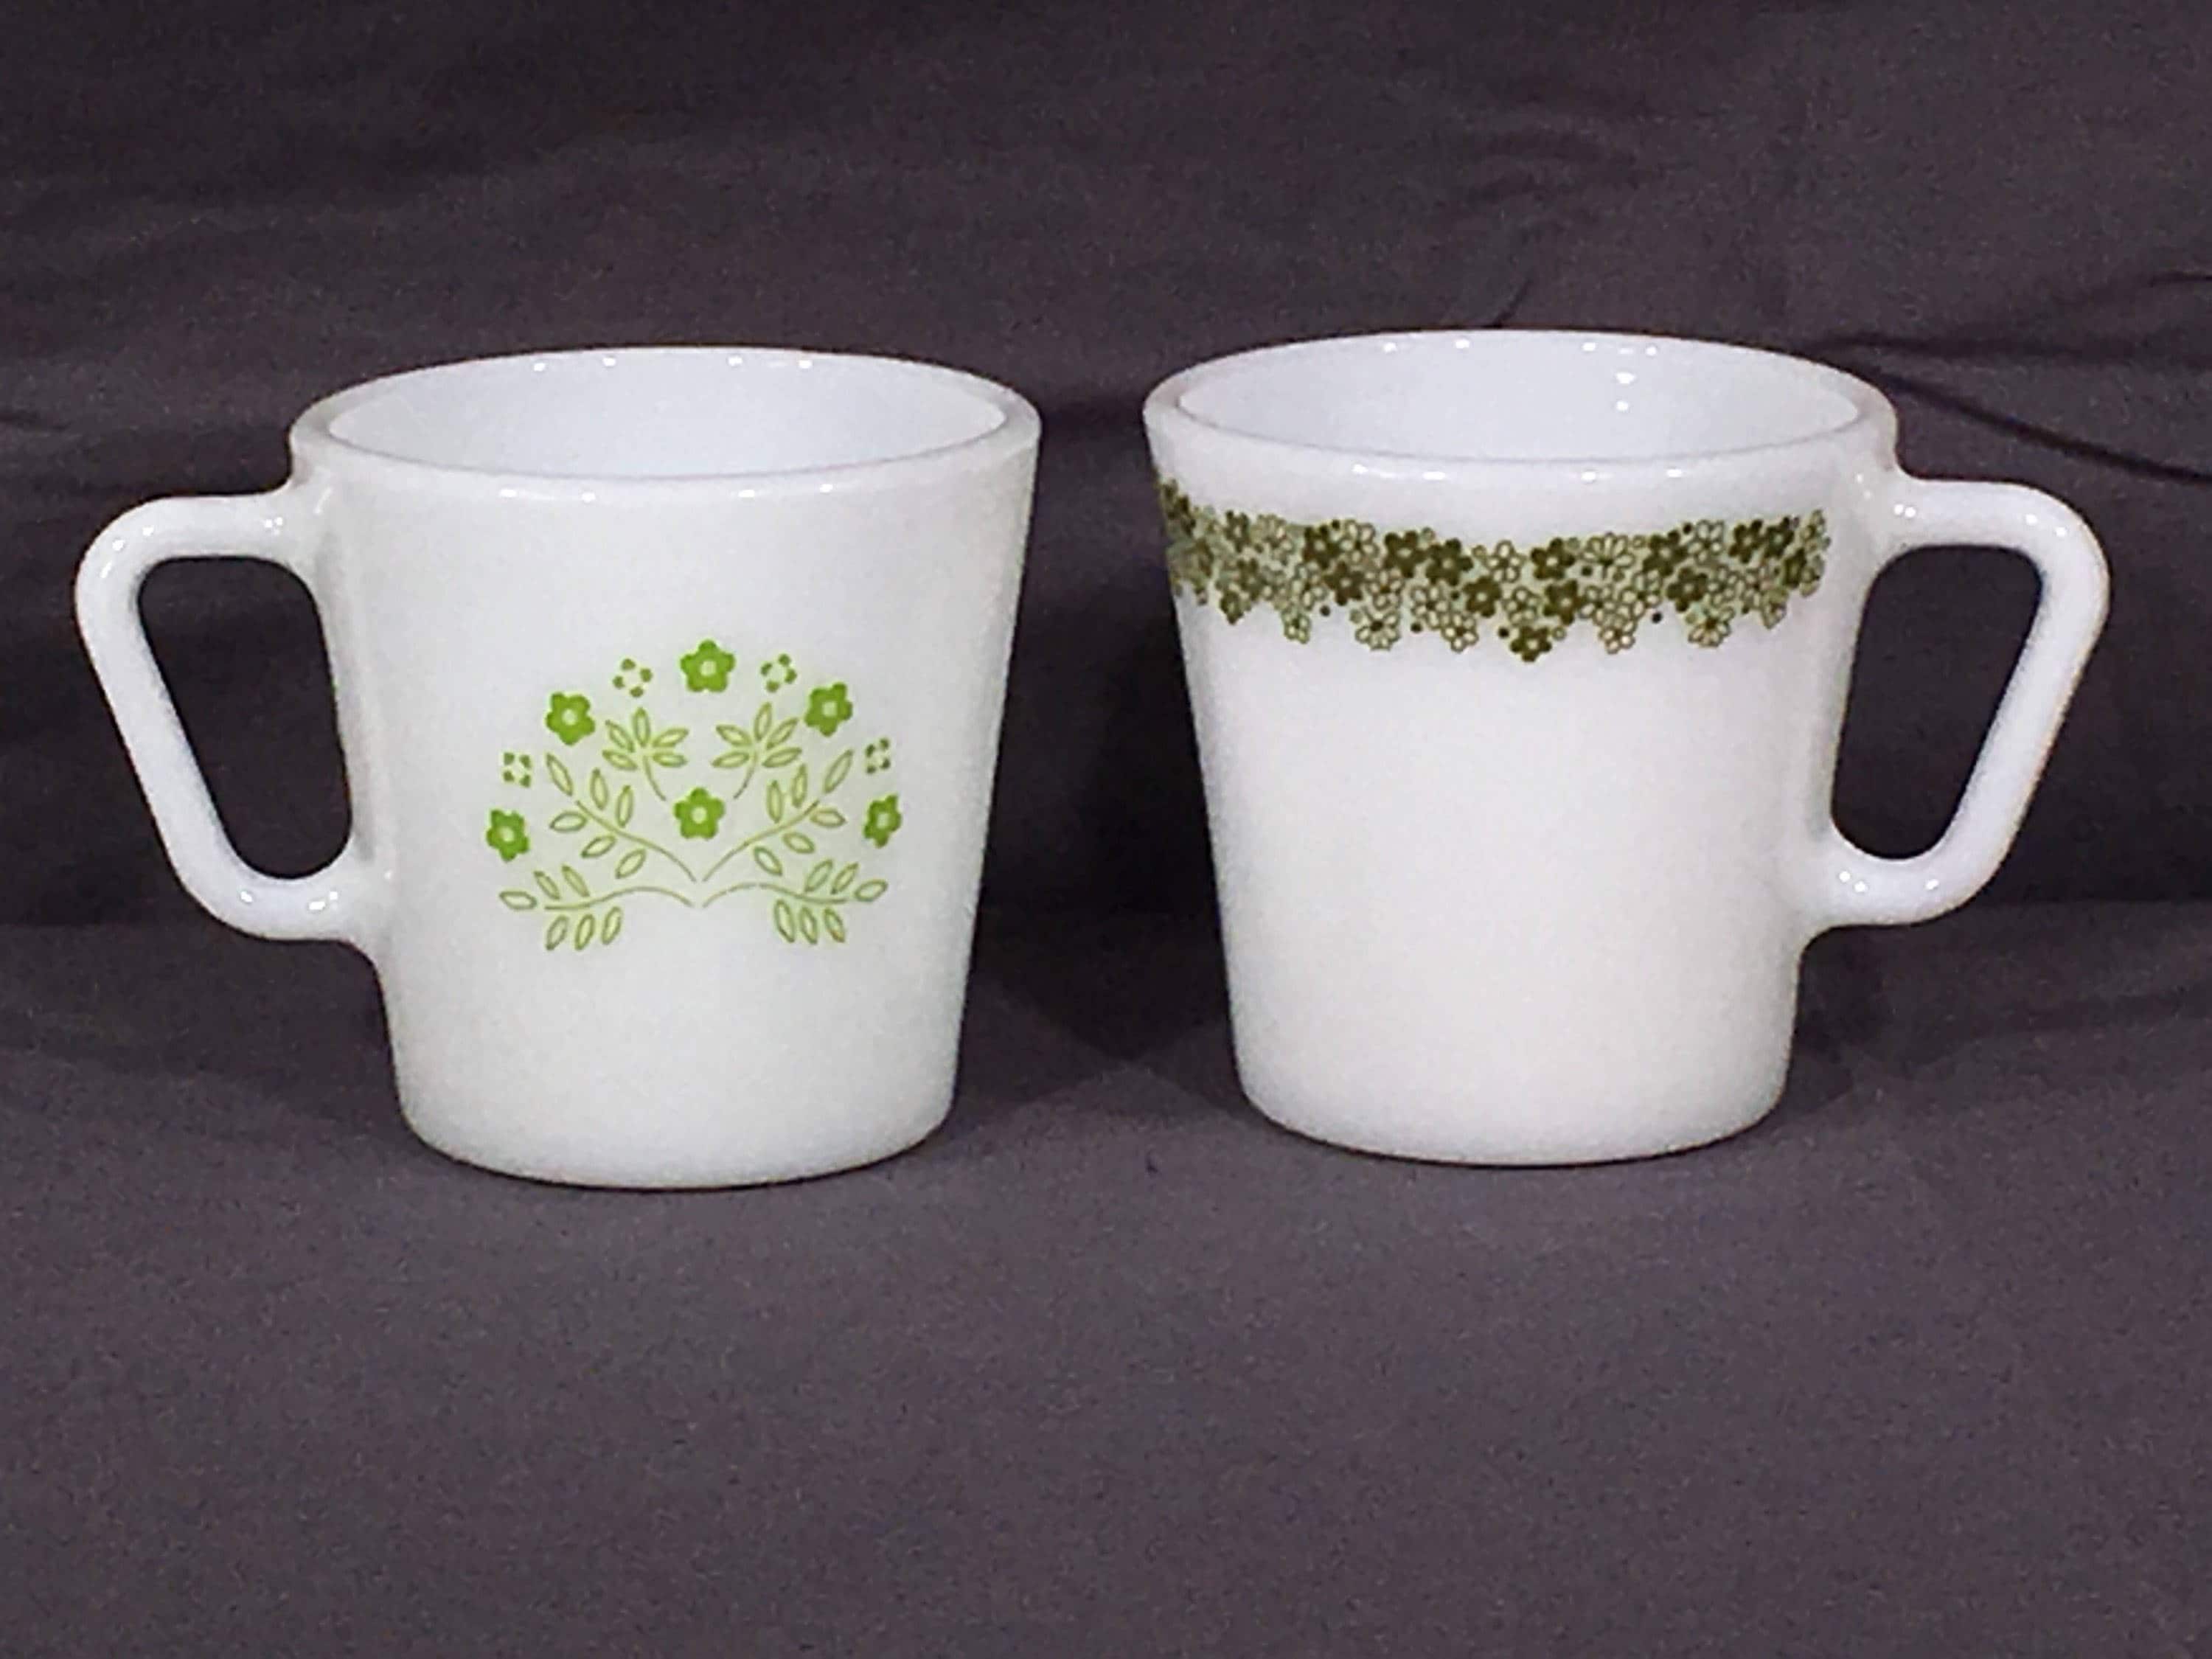  Vintage  Pyrex Mugs  Decorative Green White Coffee Cups 